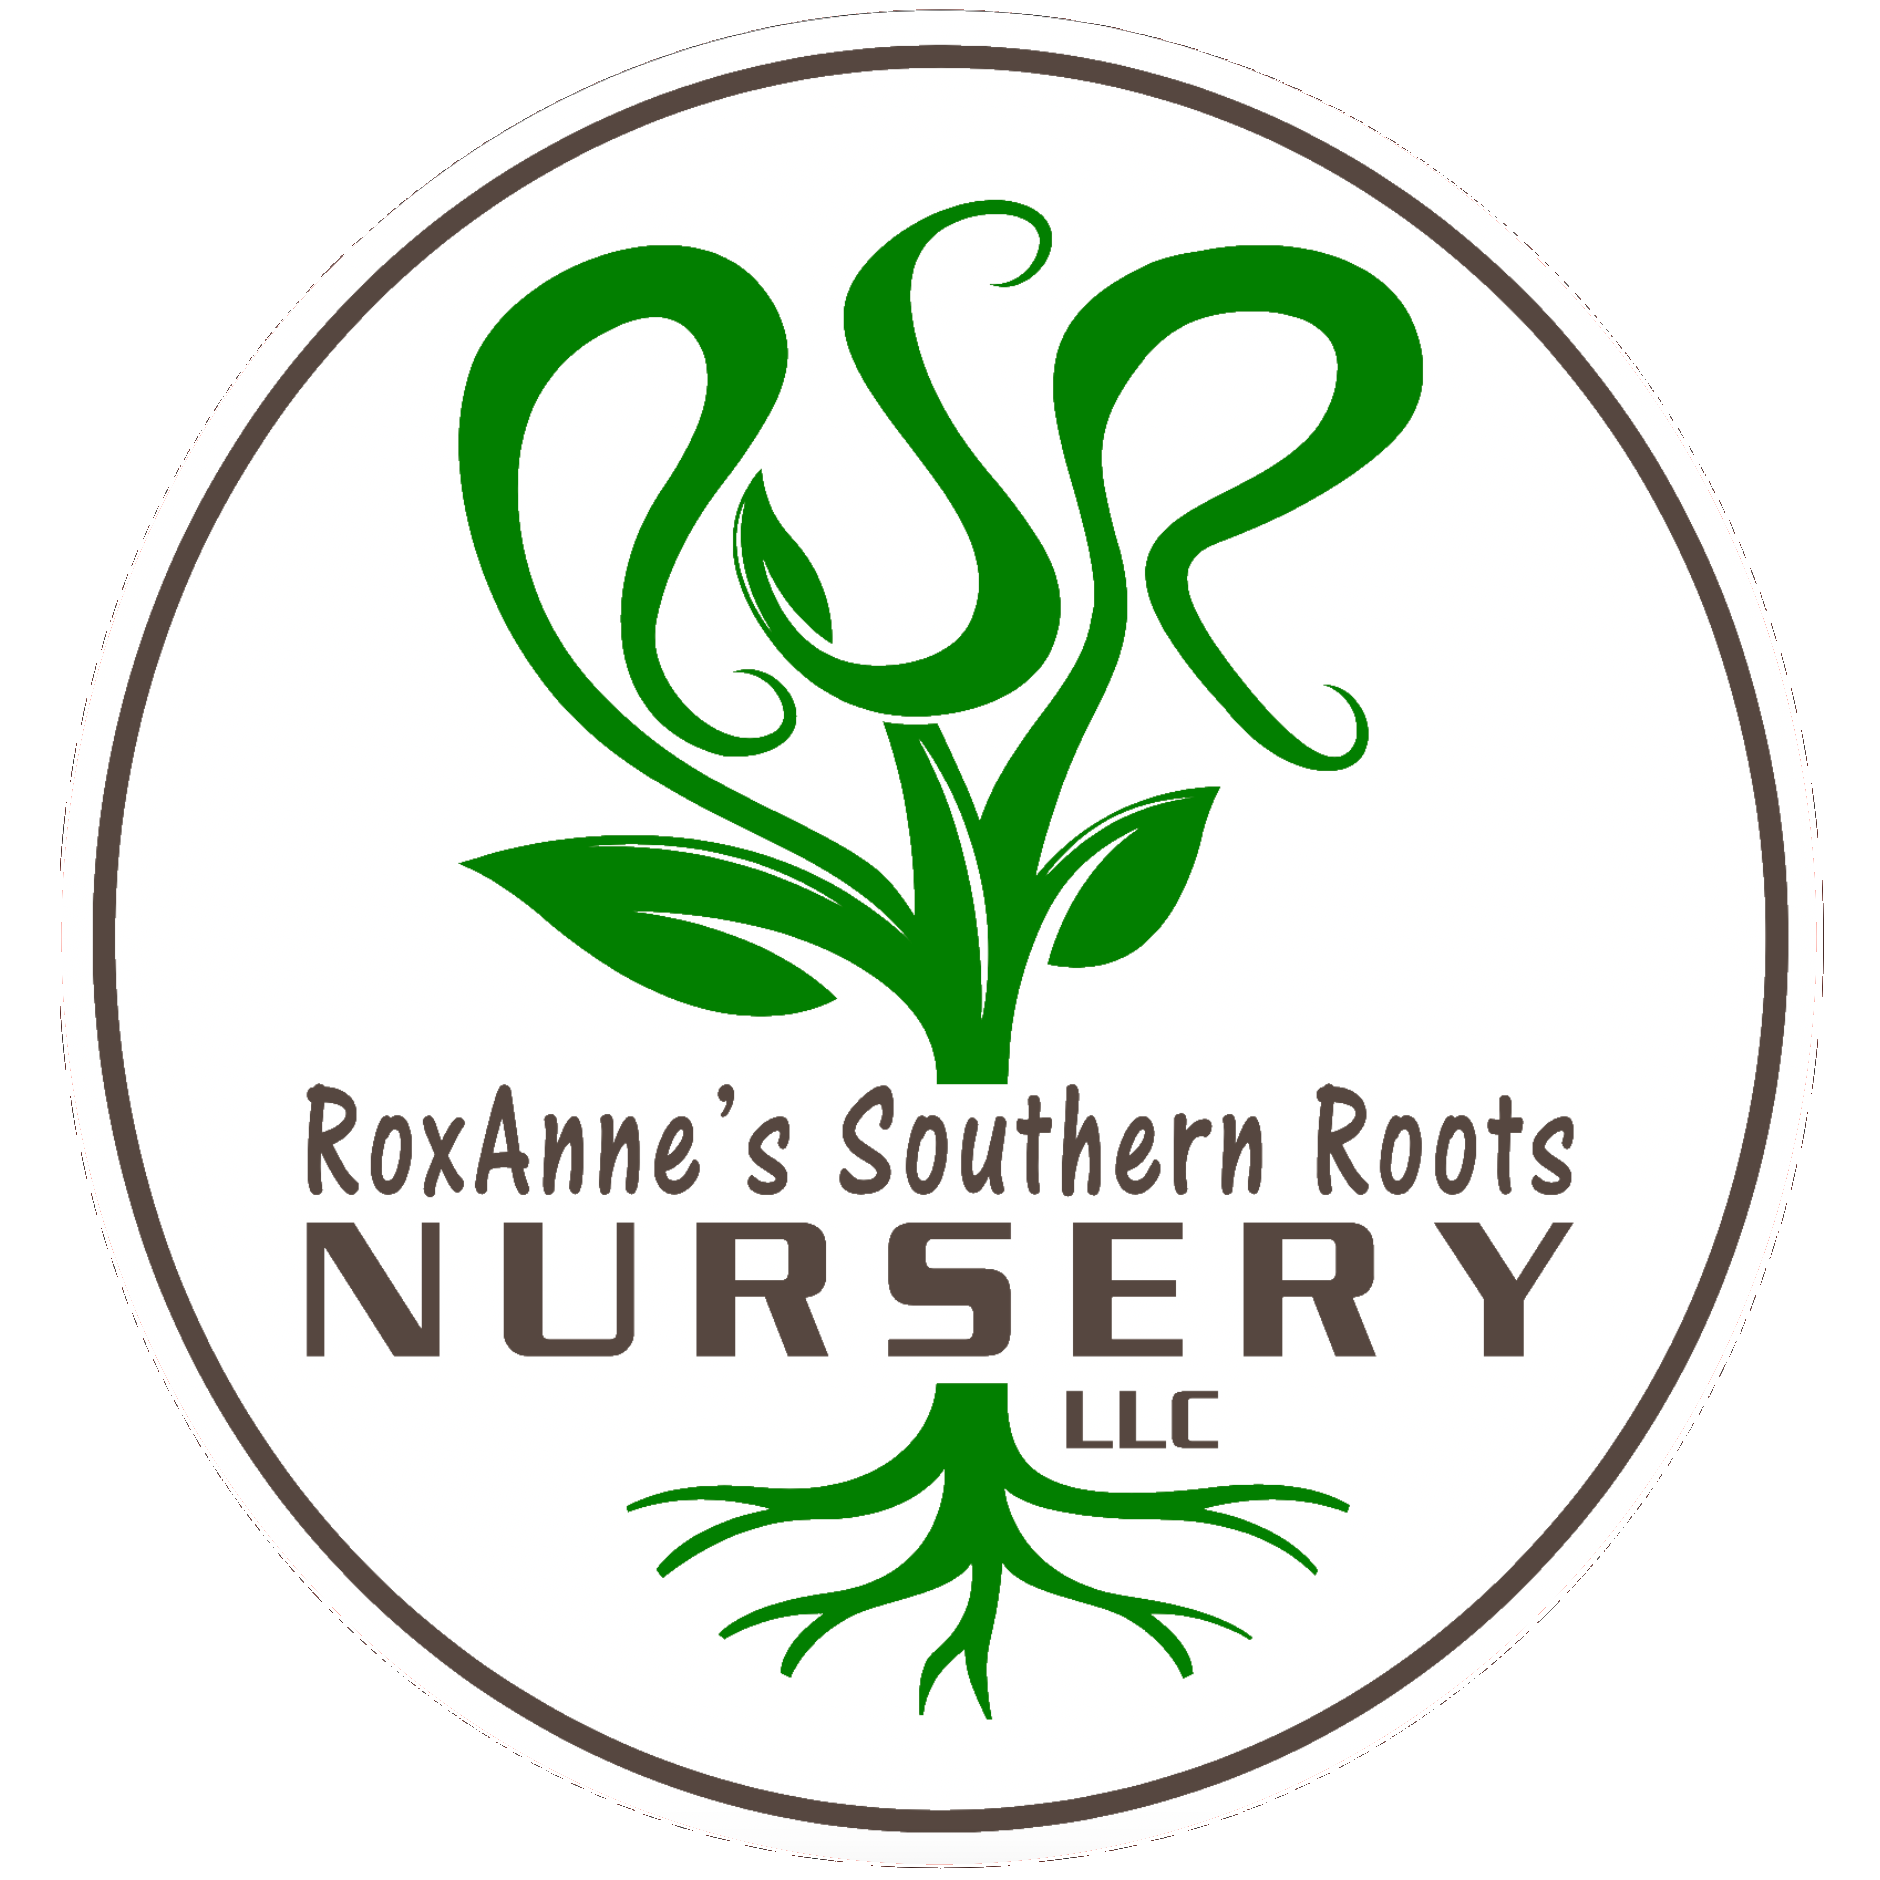 RoxAnne's Southern Roots Nursery